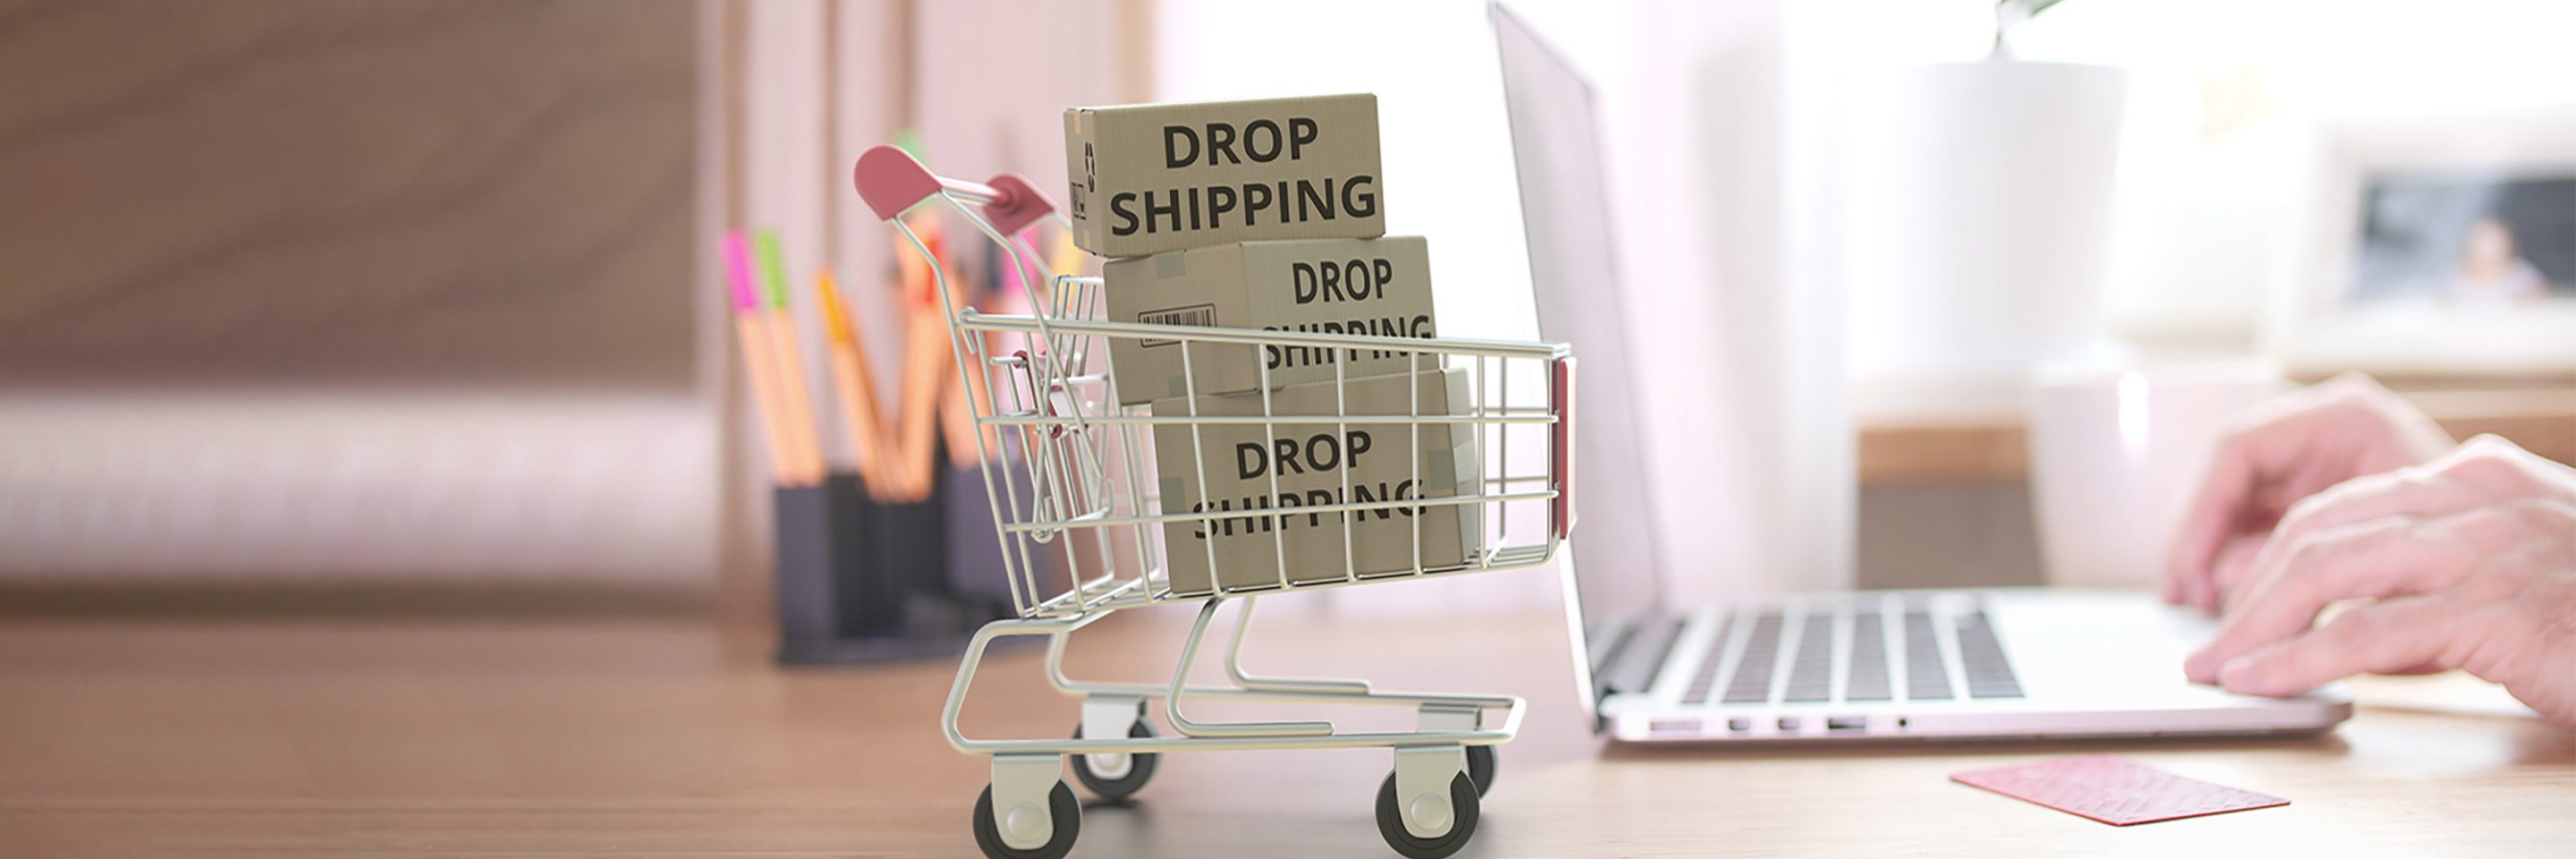 Dropshipping Suppliers	